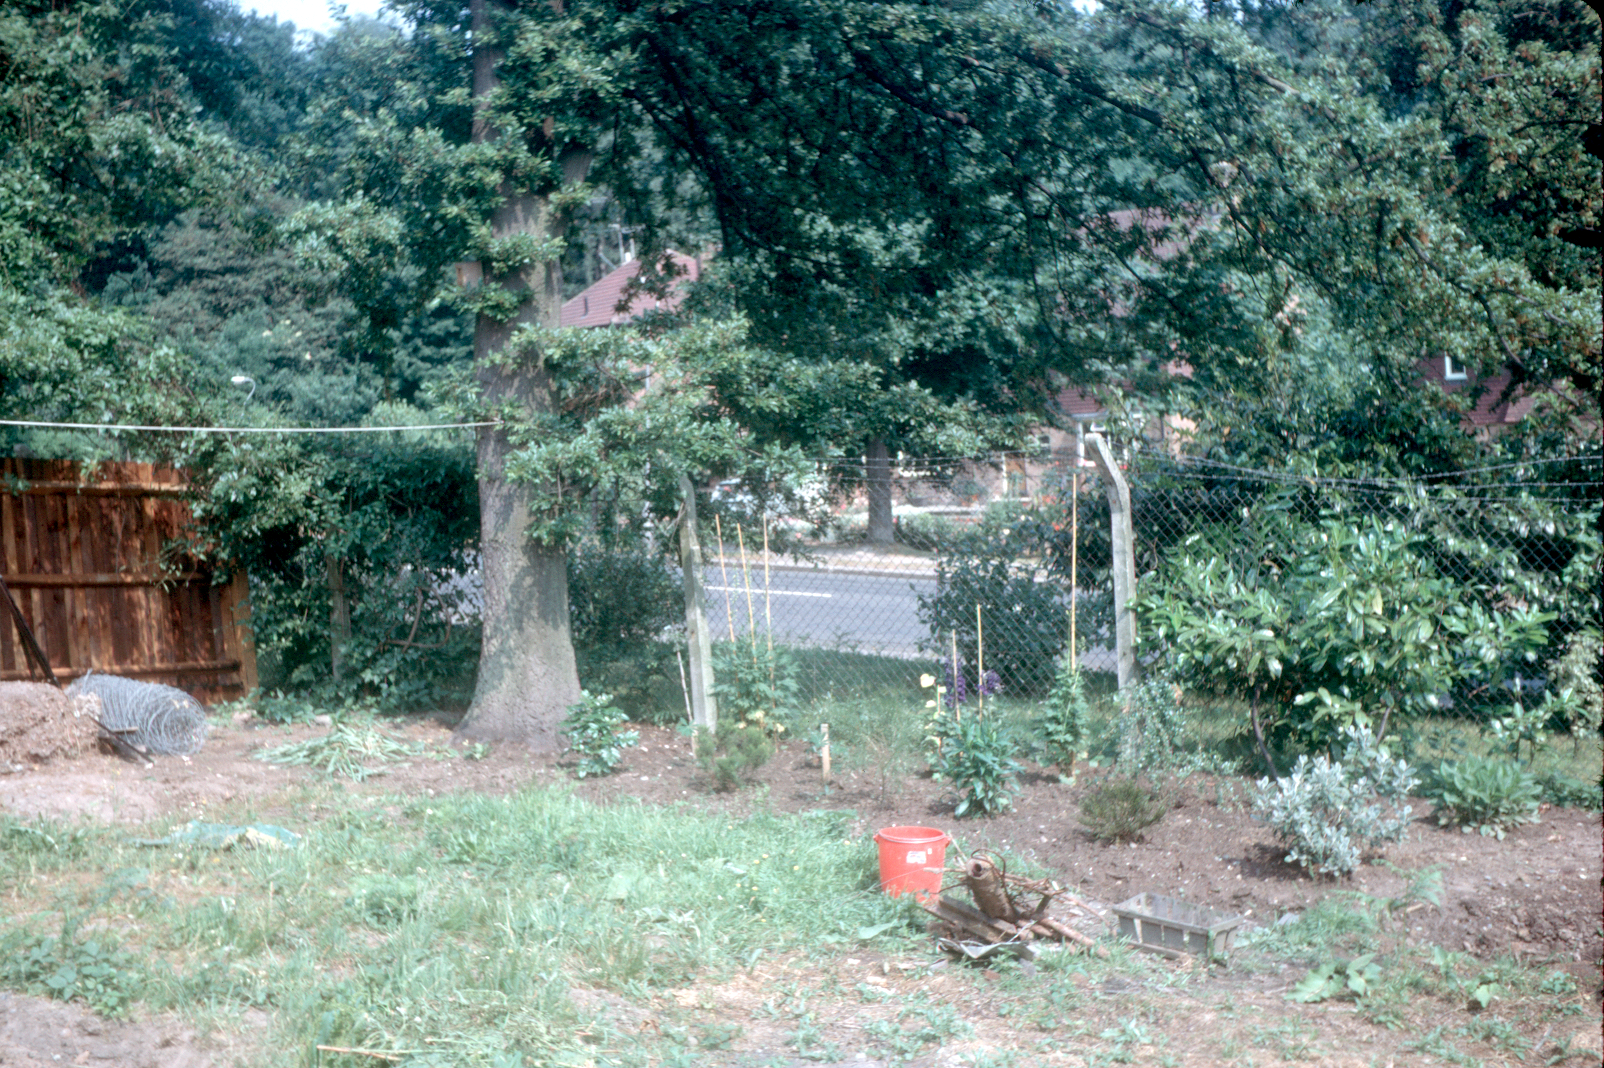 7001926k May 1970 - The chain link fence on the left was replaced by a proper wooden one, and the bed at the bottom was planted.